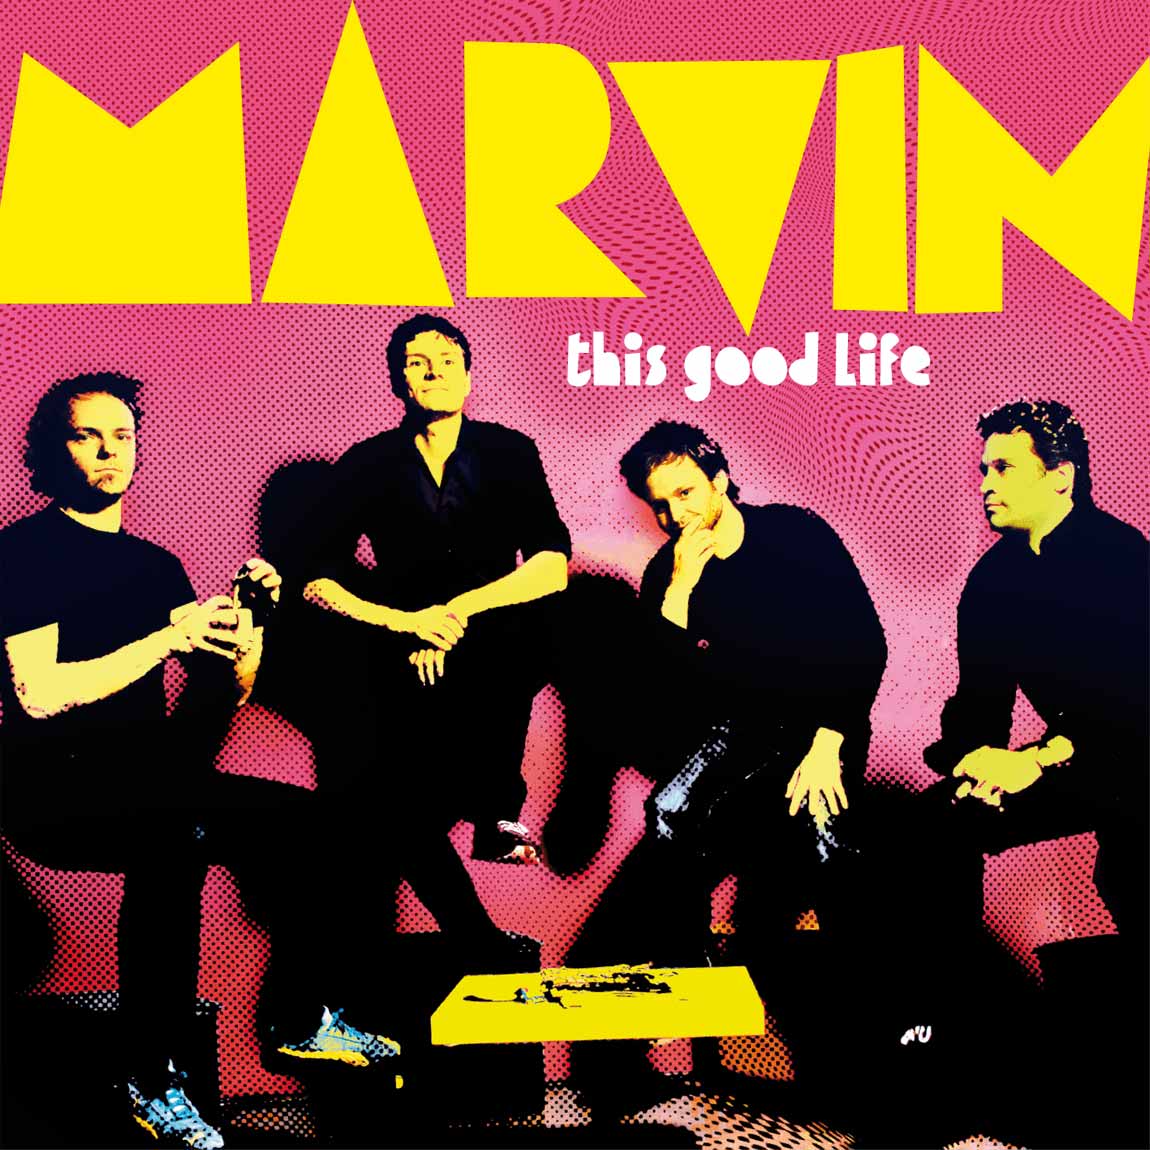 Marvin This Good Life LP Cover Variante